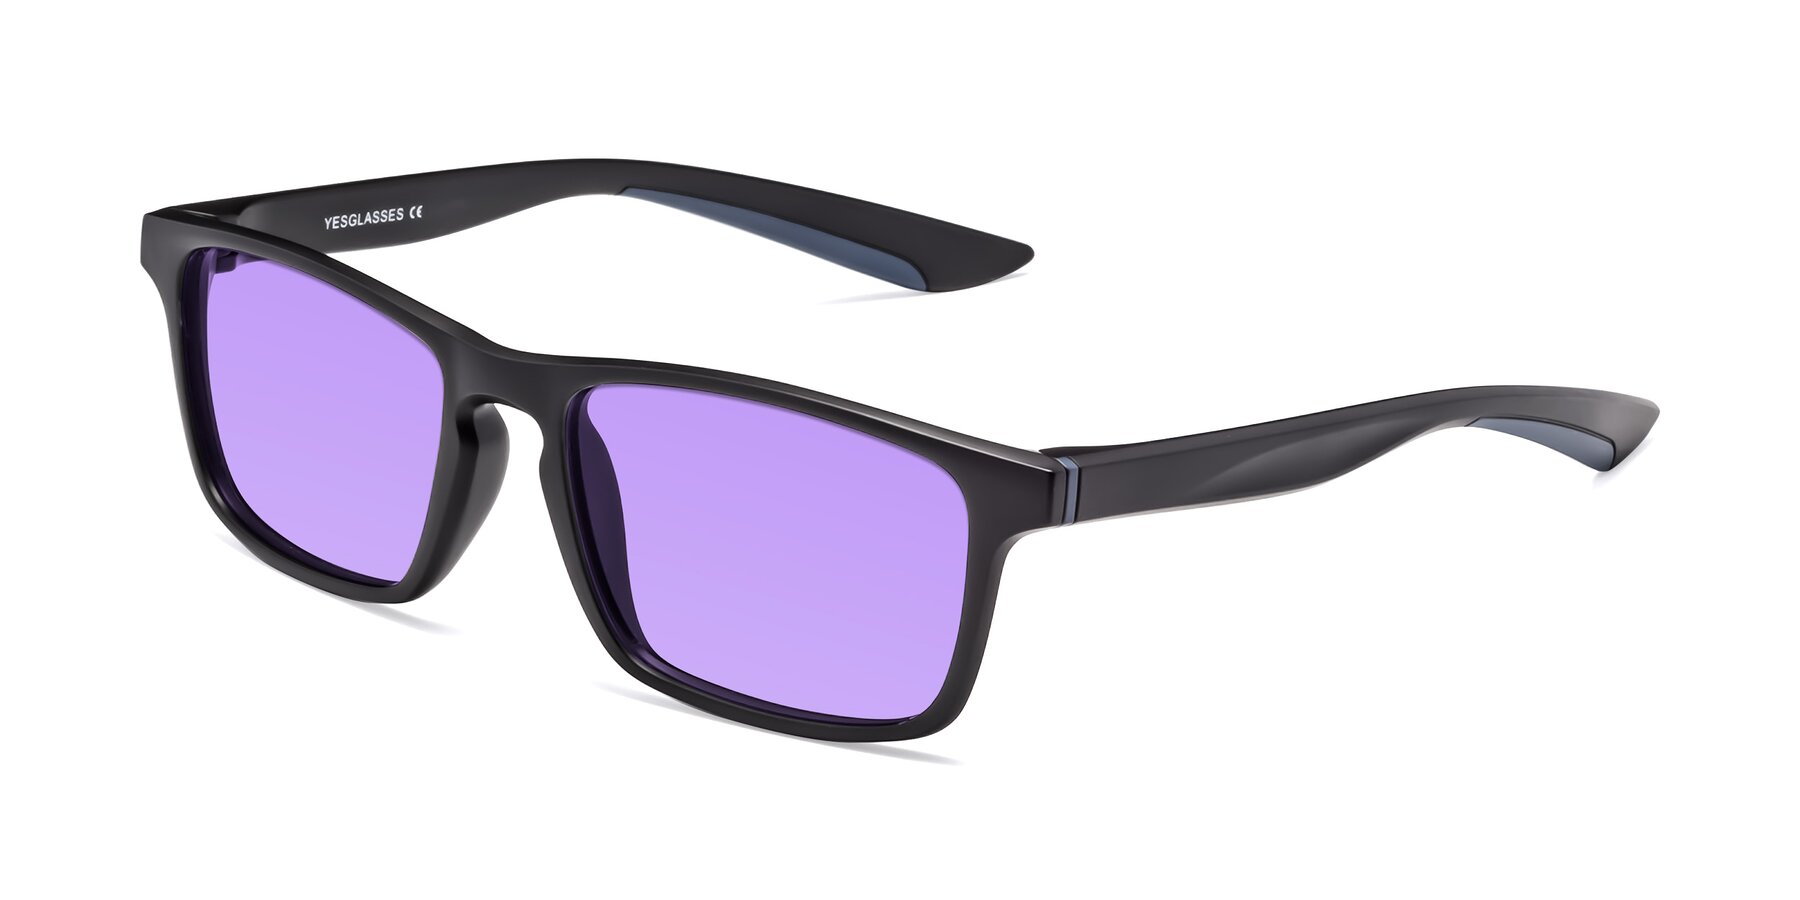 Angle of Passion in Matte Black-Blue with Medium Purple Tinted Lenses